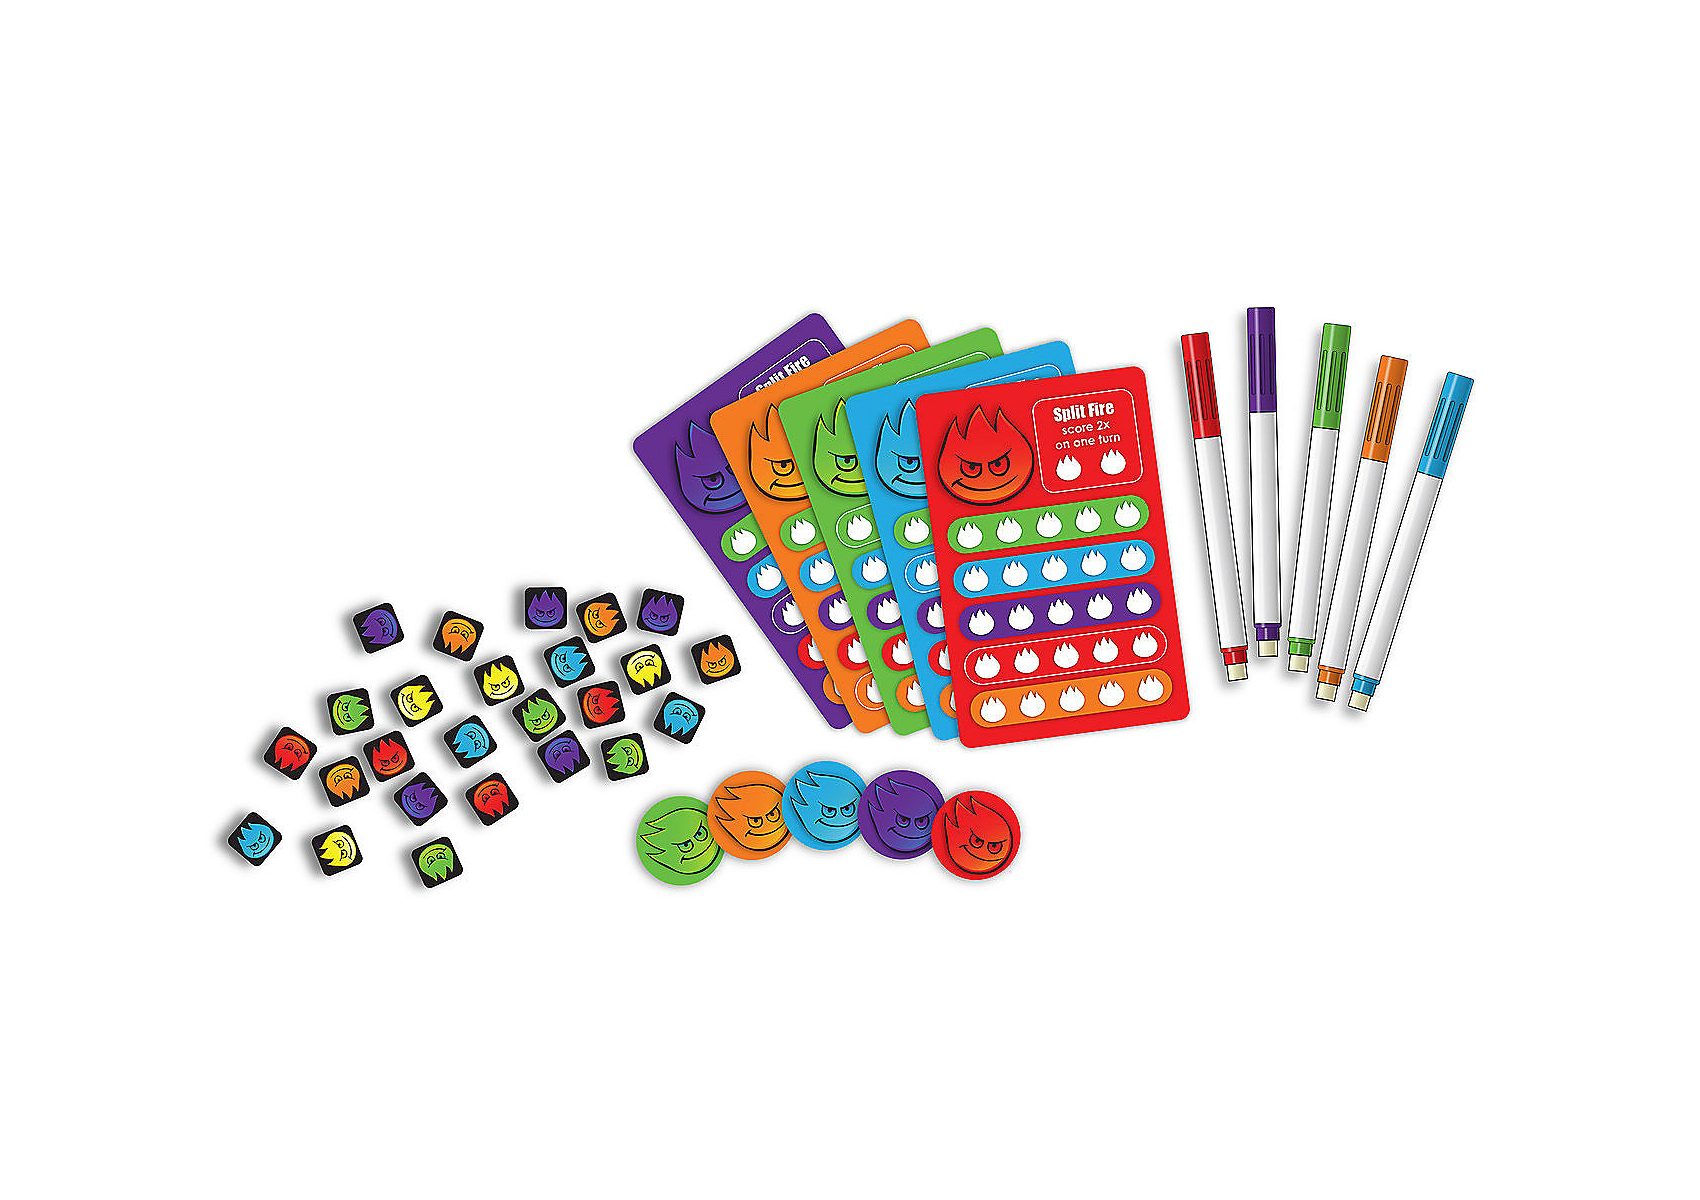 Feisty Dice Game parts showing multicolored dice with flame faces, 5 tokens, 5 colored player boards and matching dry erase markers.